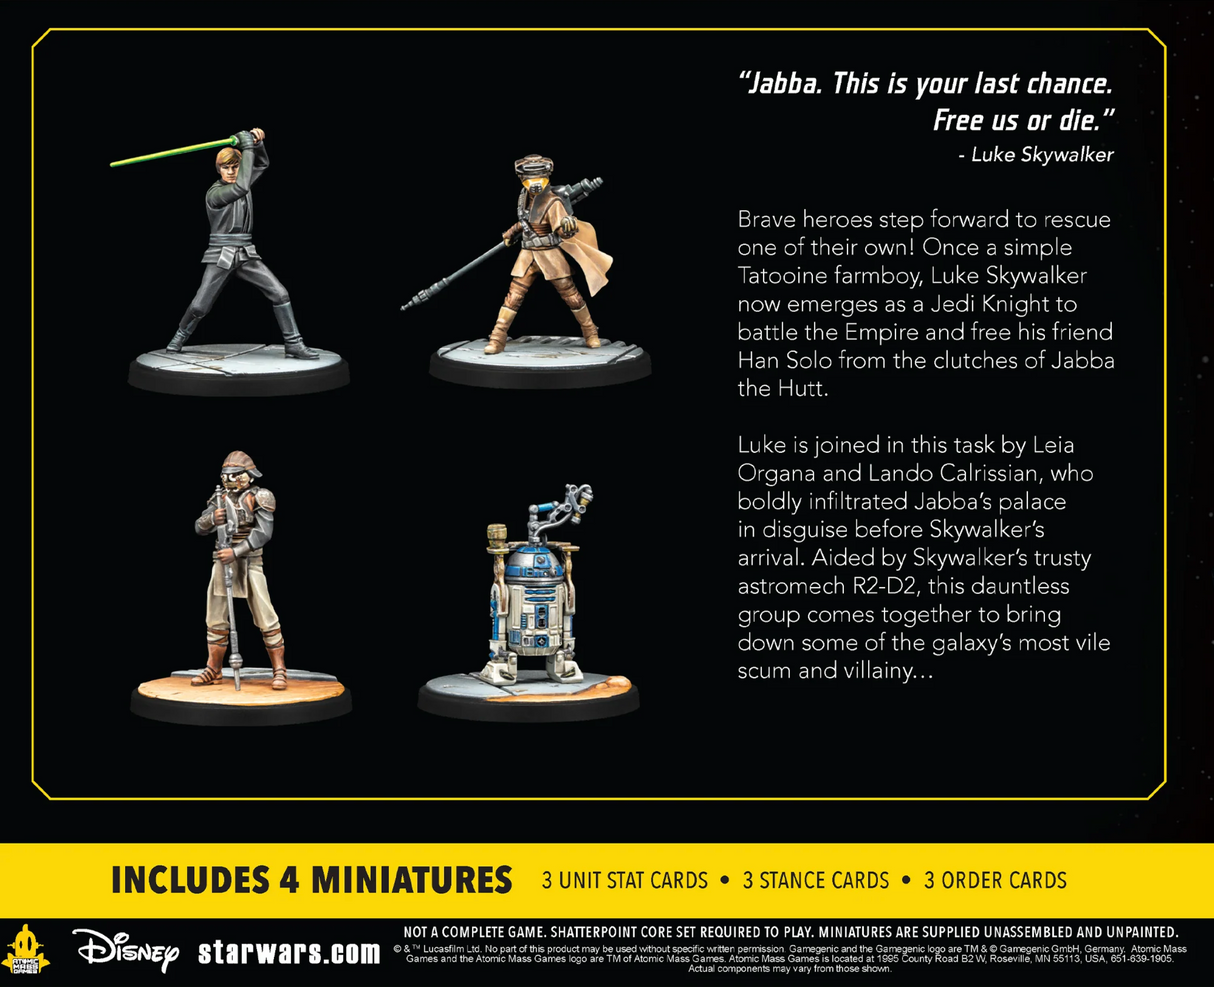 Star Wars Shatterpoint: Fearless and Inventive Squad Pack (Jedi Luke Skywalker)